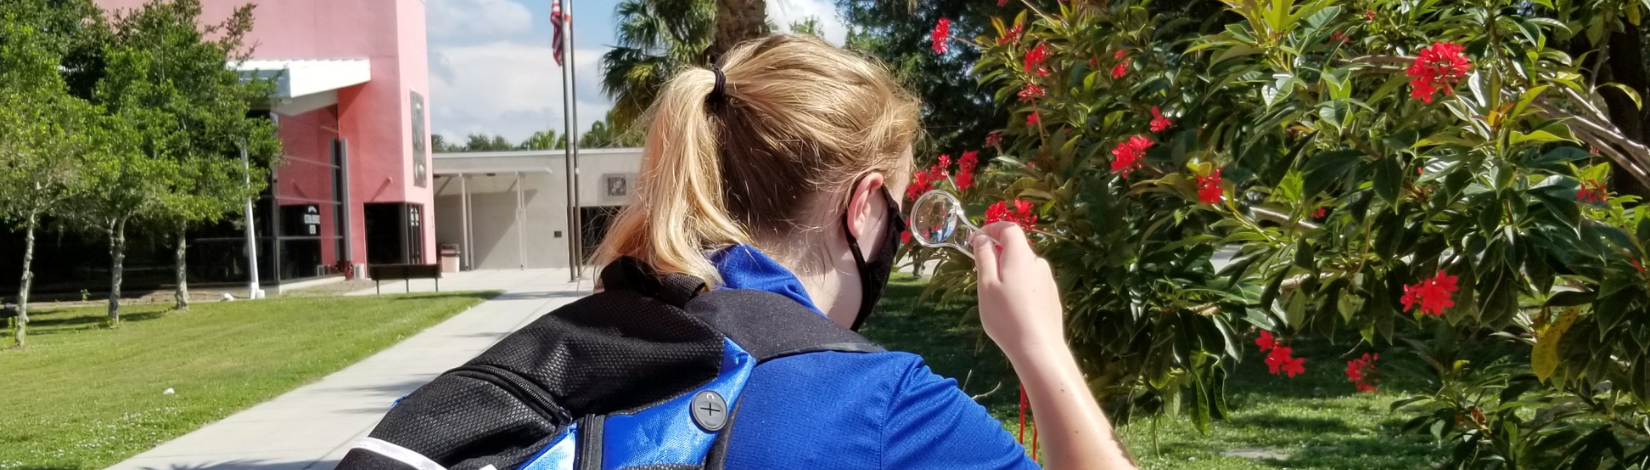 Student observing flowers through a magnifying lens